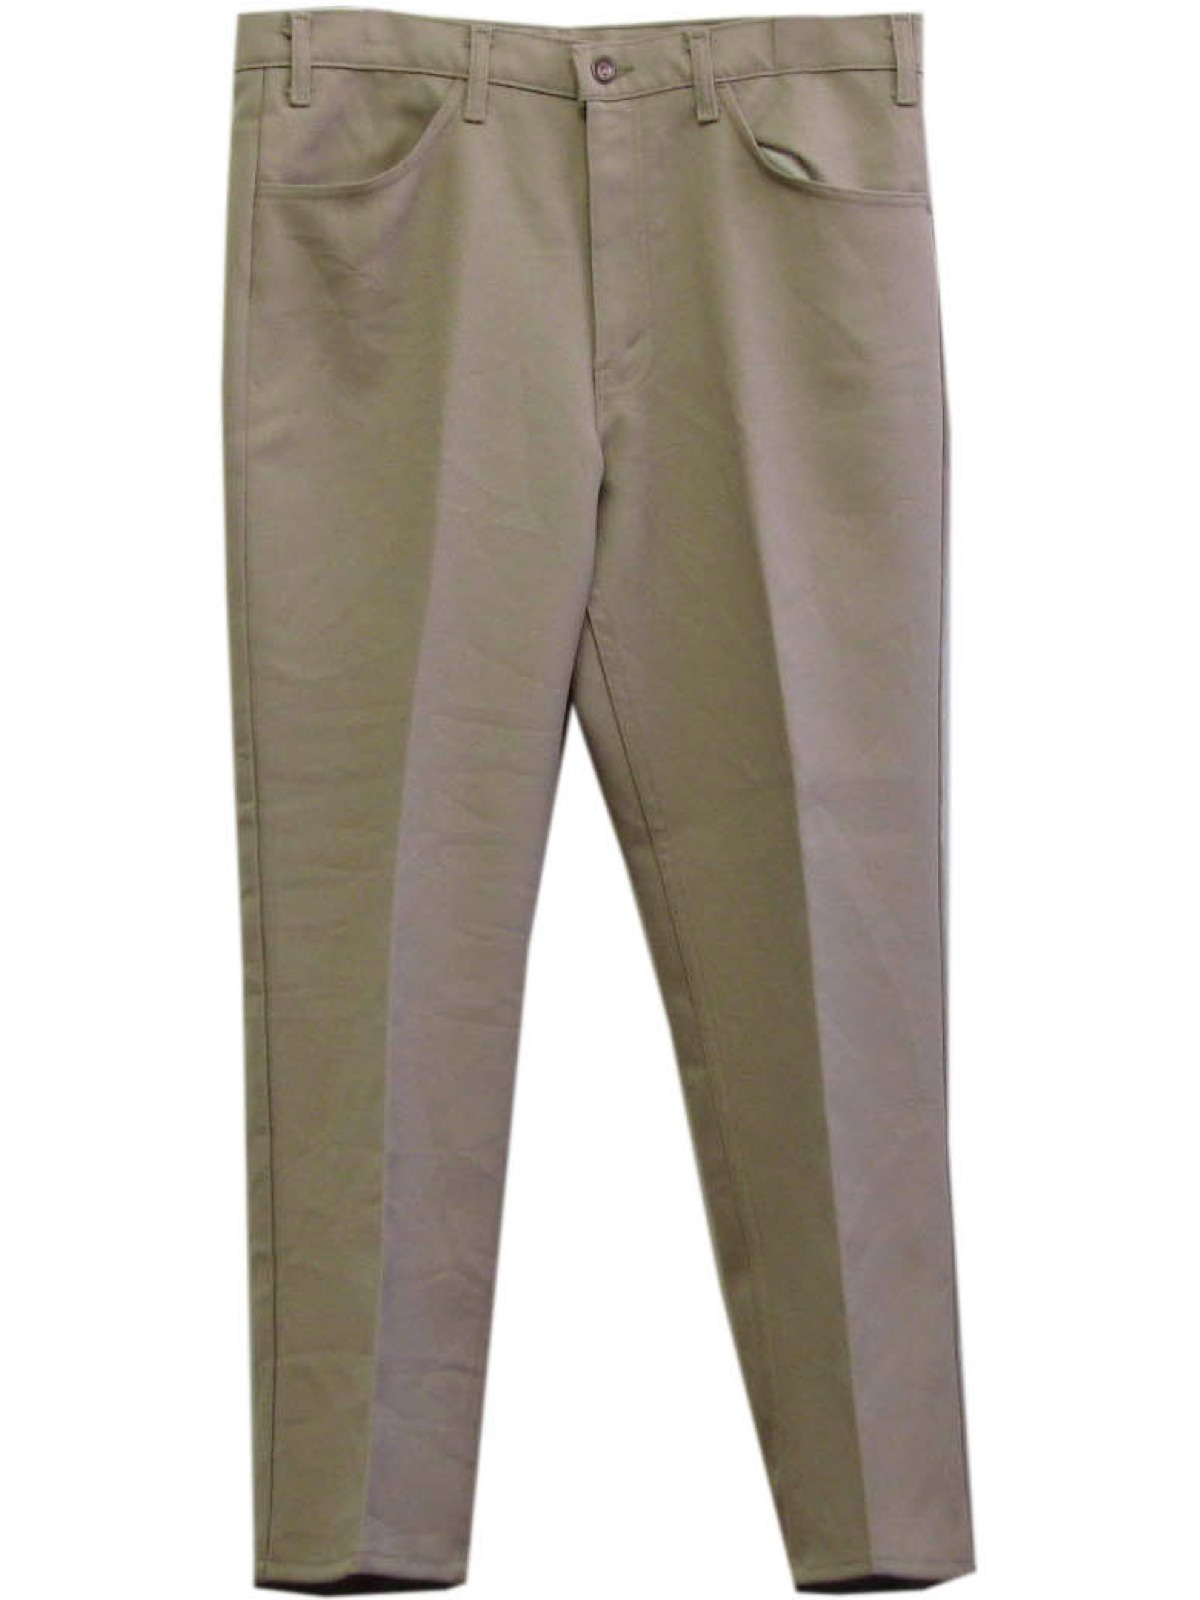 Vintage 70s Flared Pants / Flares: 70s -Levis- Mens tan polyester four ...